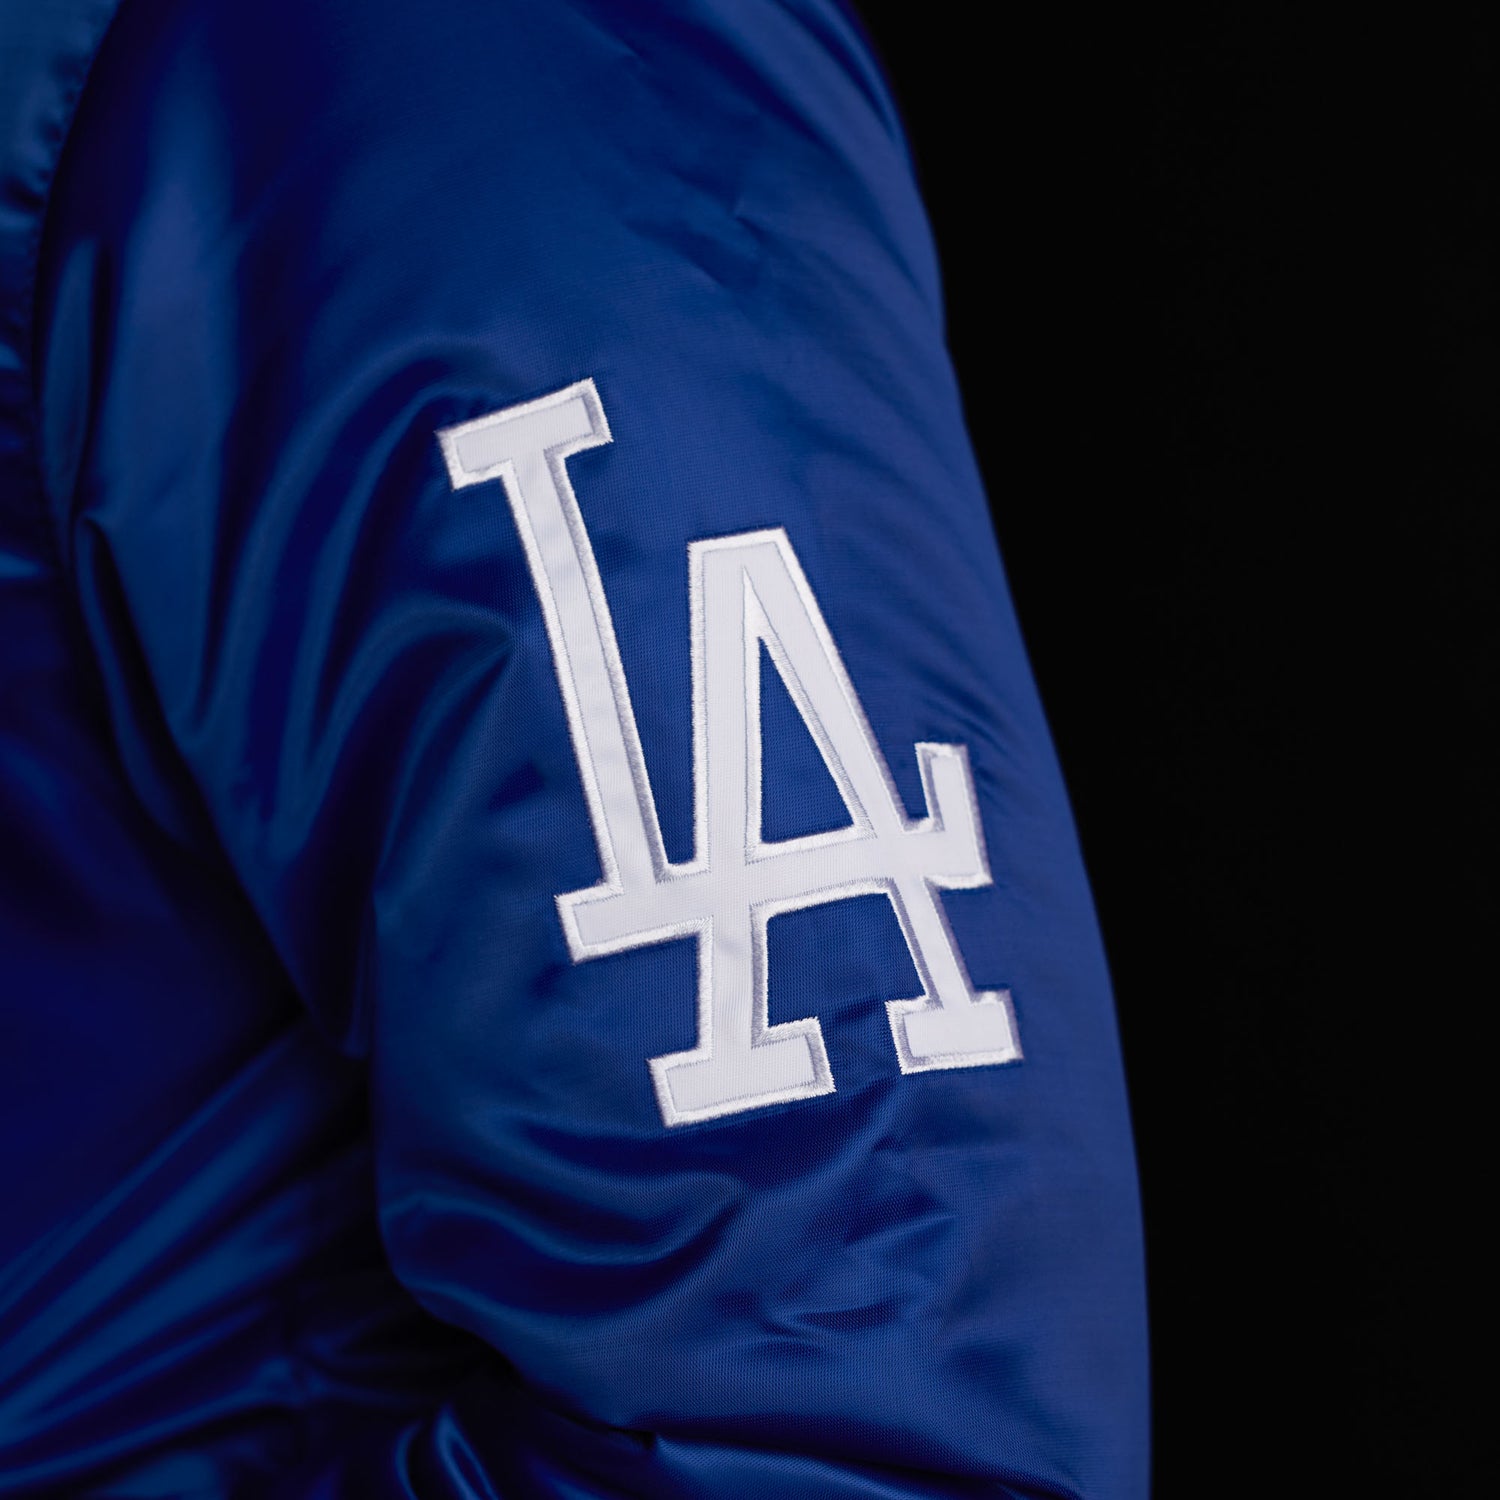 Dodgers Blue Heaven: Bid on Some of Those Great Dodgers' Hockey